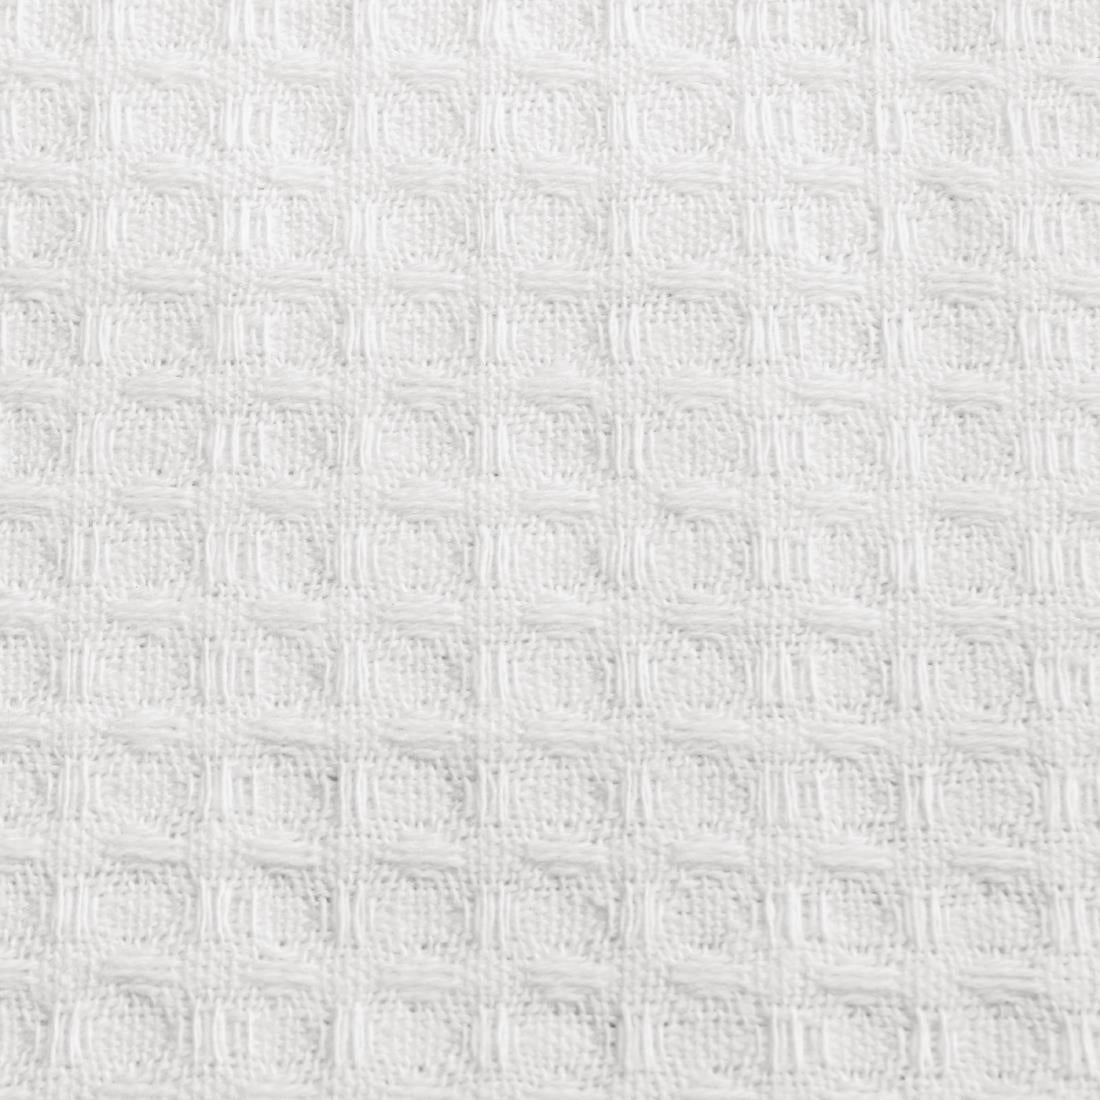 CC598 Vogue Cloths White Honeycomb Weave (Pack of 10)